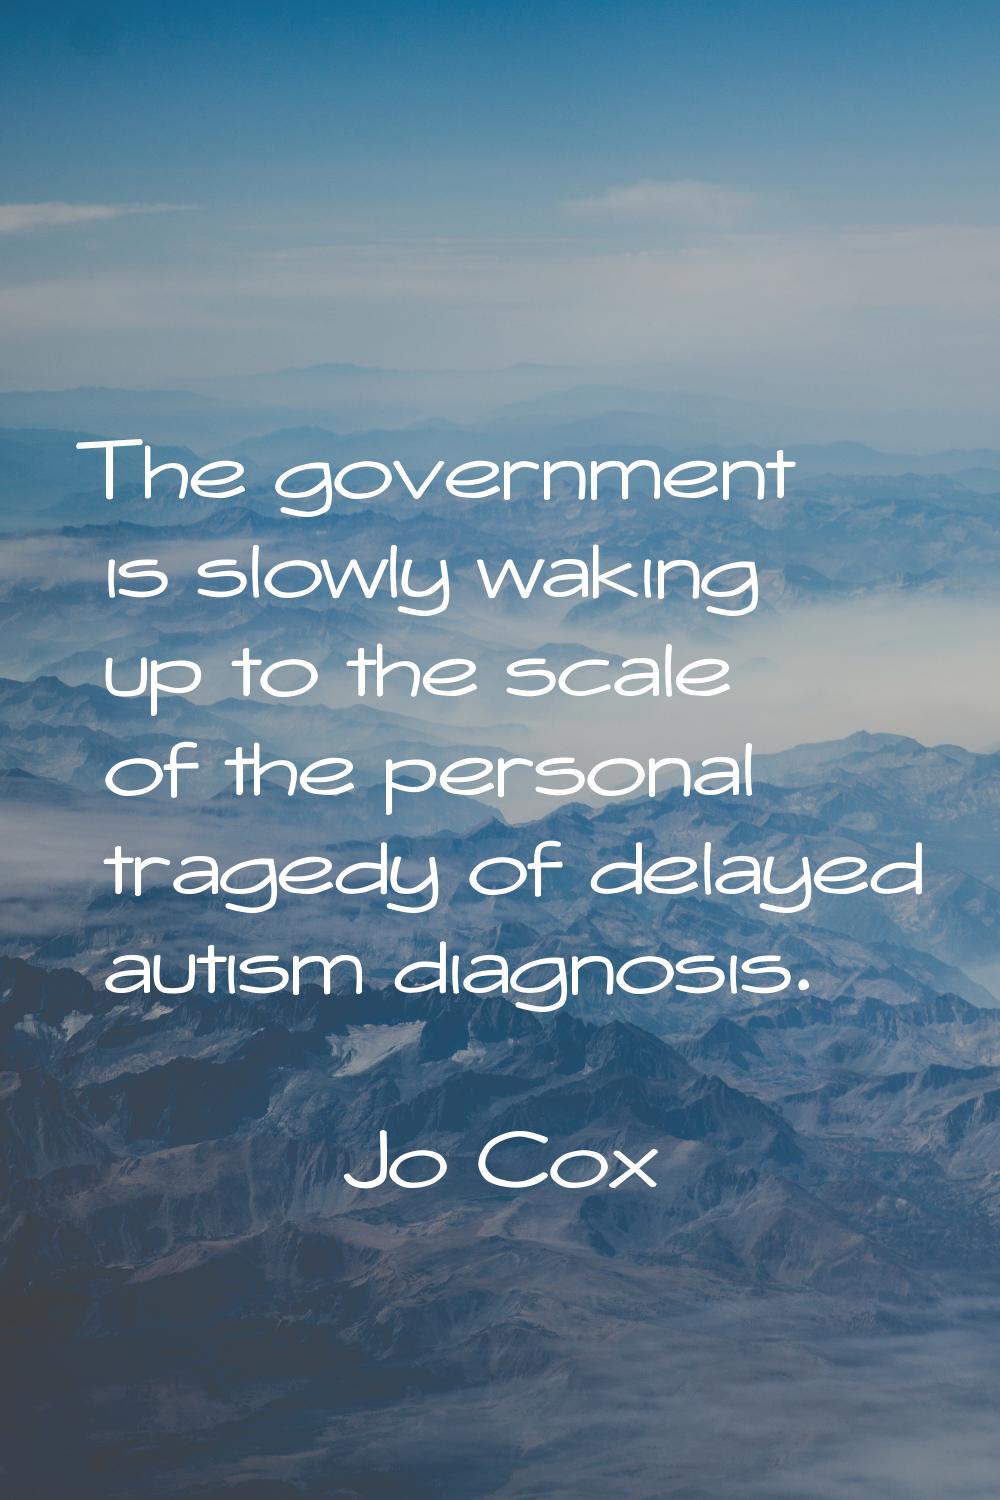 The government is slowly waking up to the scale of the personal tragedy of delayed autism diagnosis